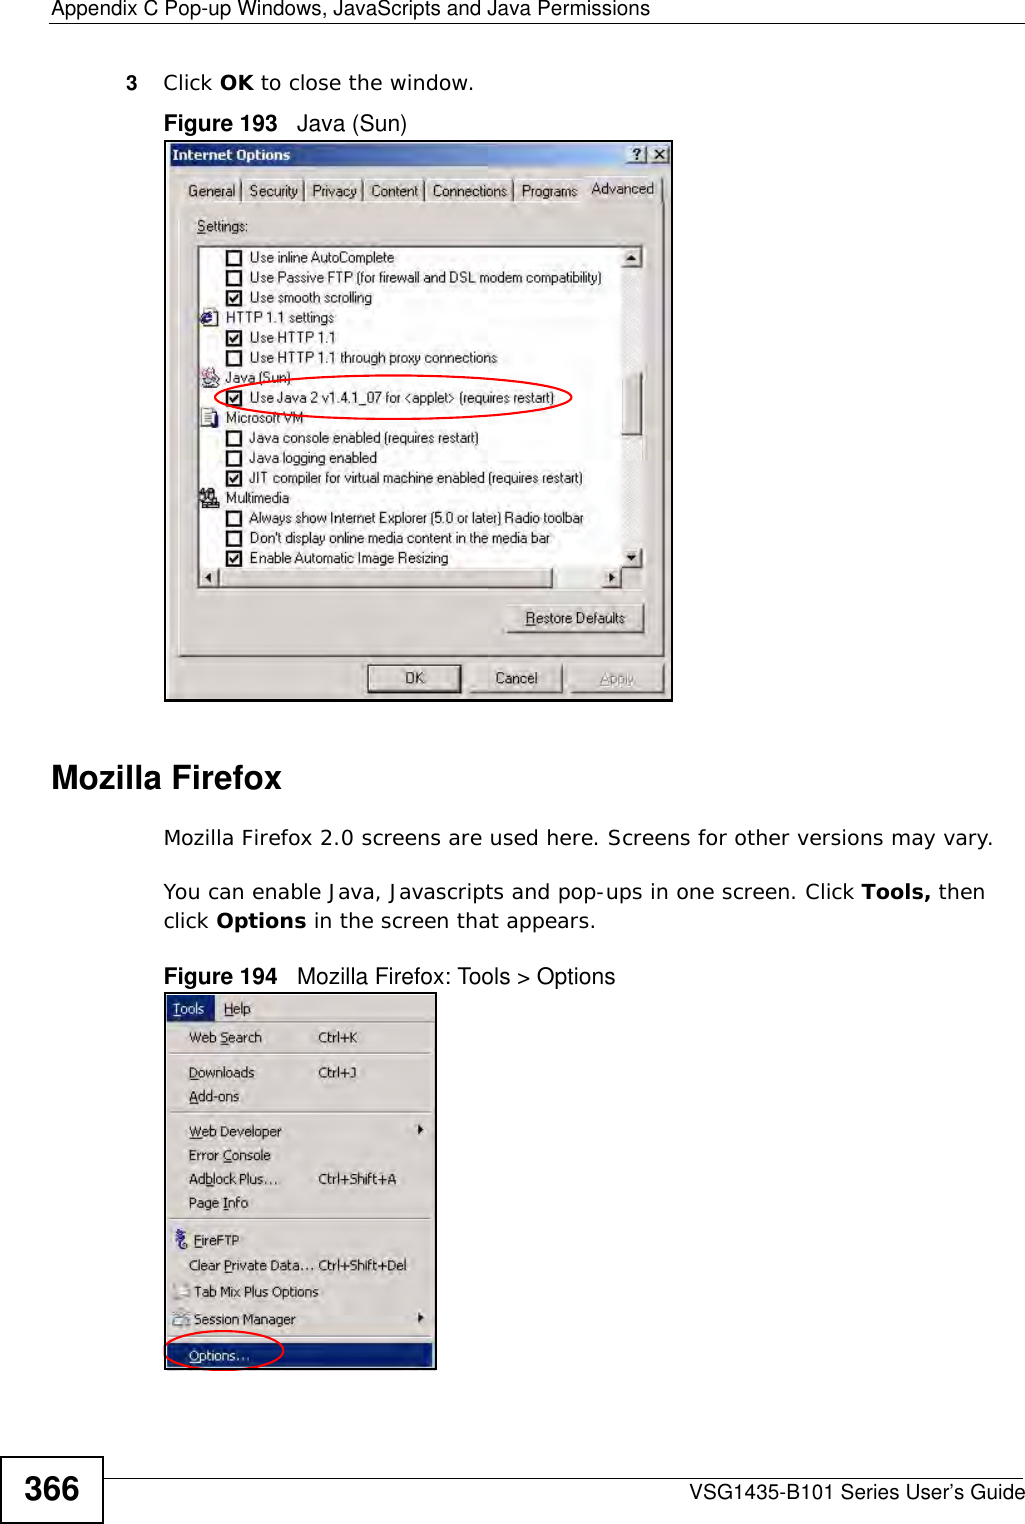 Appendix C Pop-up Windows, JavaScripts and Java PermissionsVSG1435-B101 Series User’s Guide3663Click OK to close the window.Figure 193   Java (Sun)Mozilla FirefoxMozilla Firefox 2.0 screens are used here. Screens for other versions may vary. You can enable Java, Javascripts and pop-ups in one screen. Click Tools, then click Options in the screen that appears.Figure 194   Mozilla Firefox: Tools &gt; Options